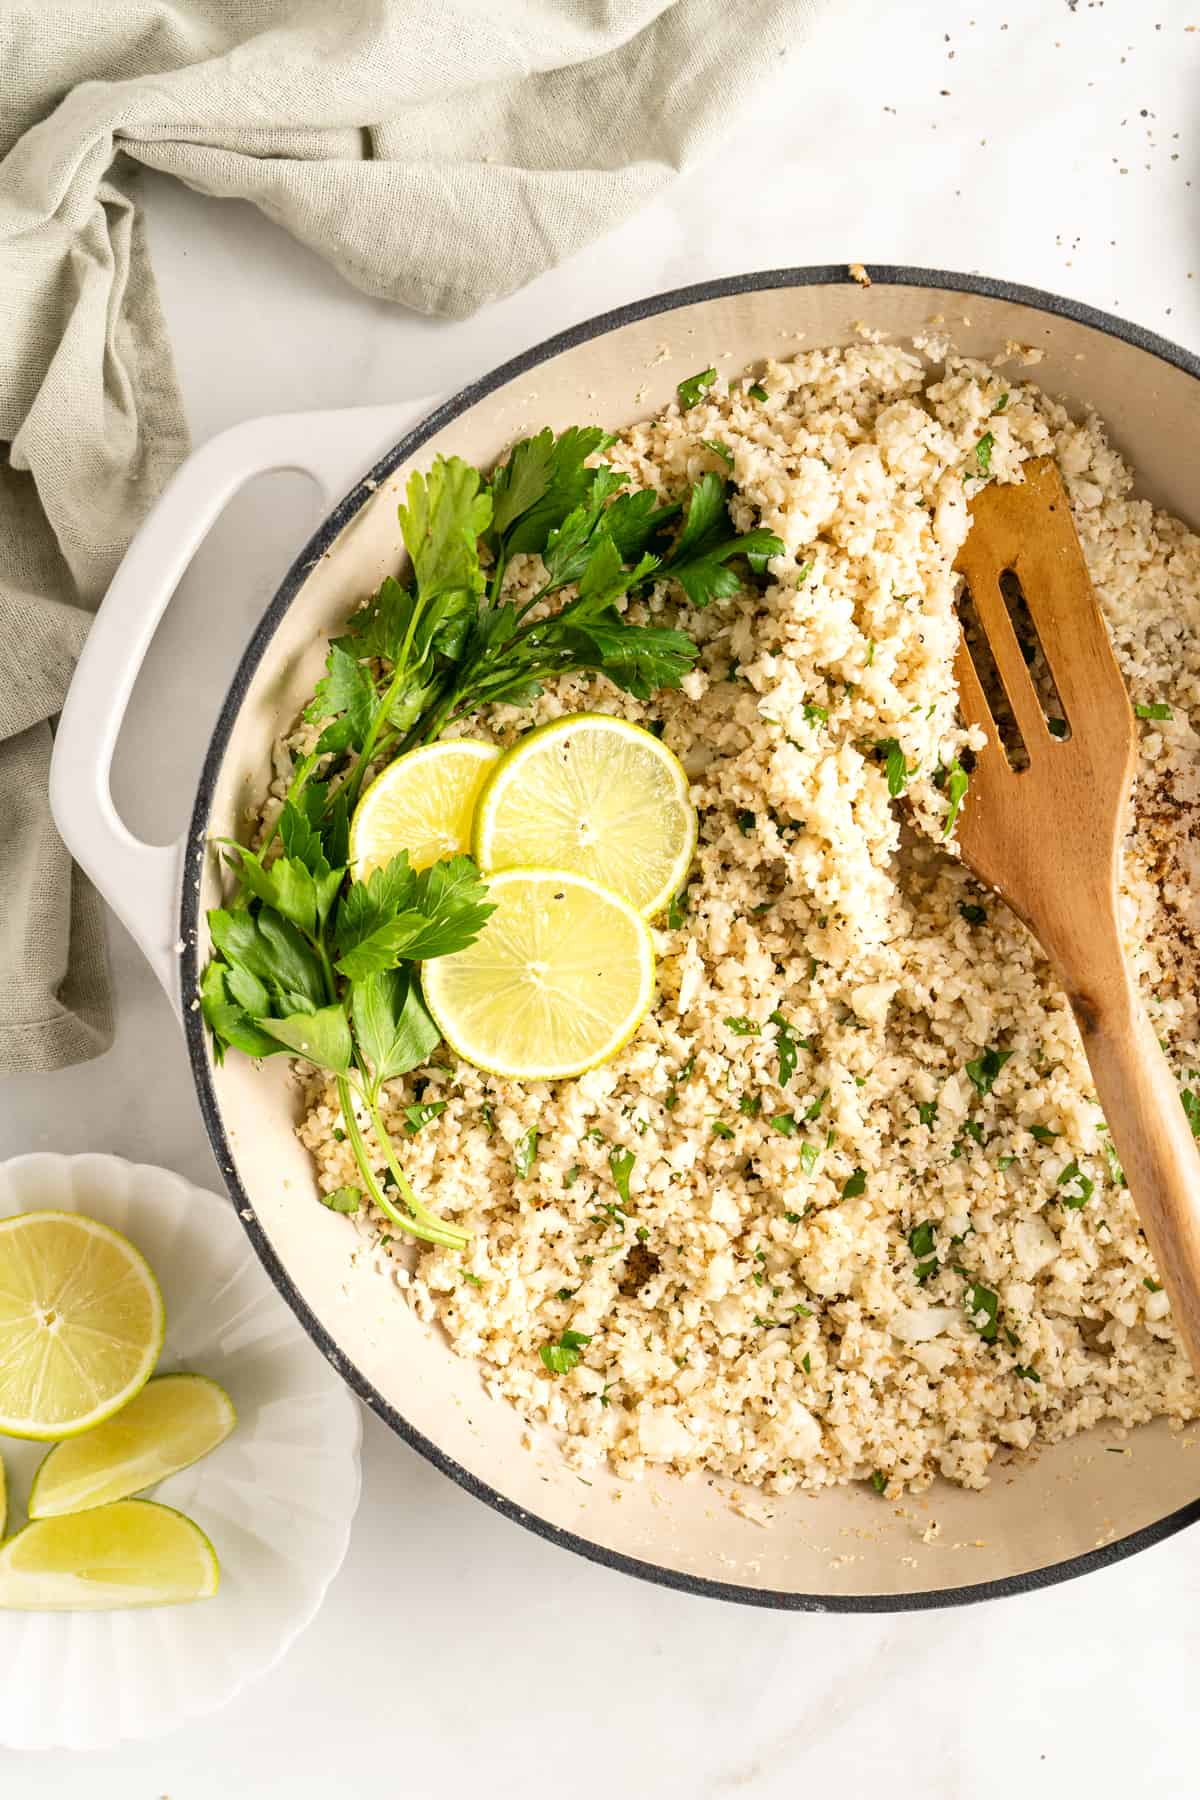 Overhead view of cauliflower rice in skillet garnished with parsley sprigs and lime slices